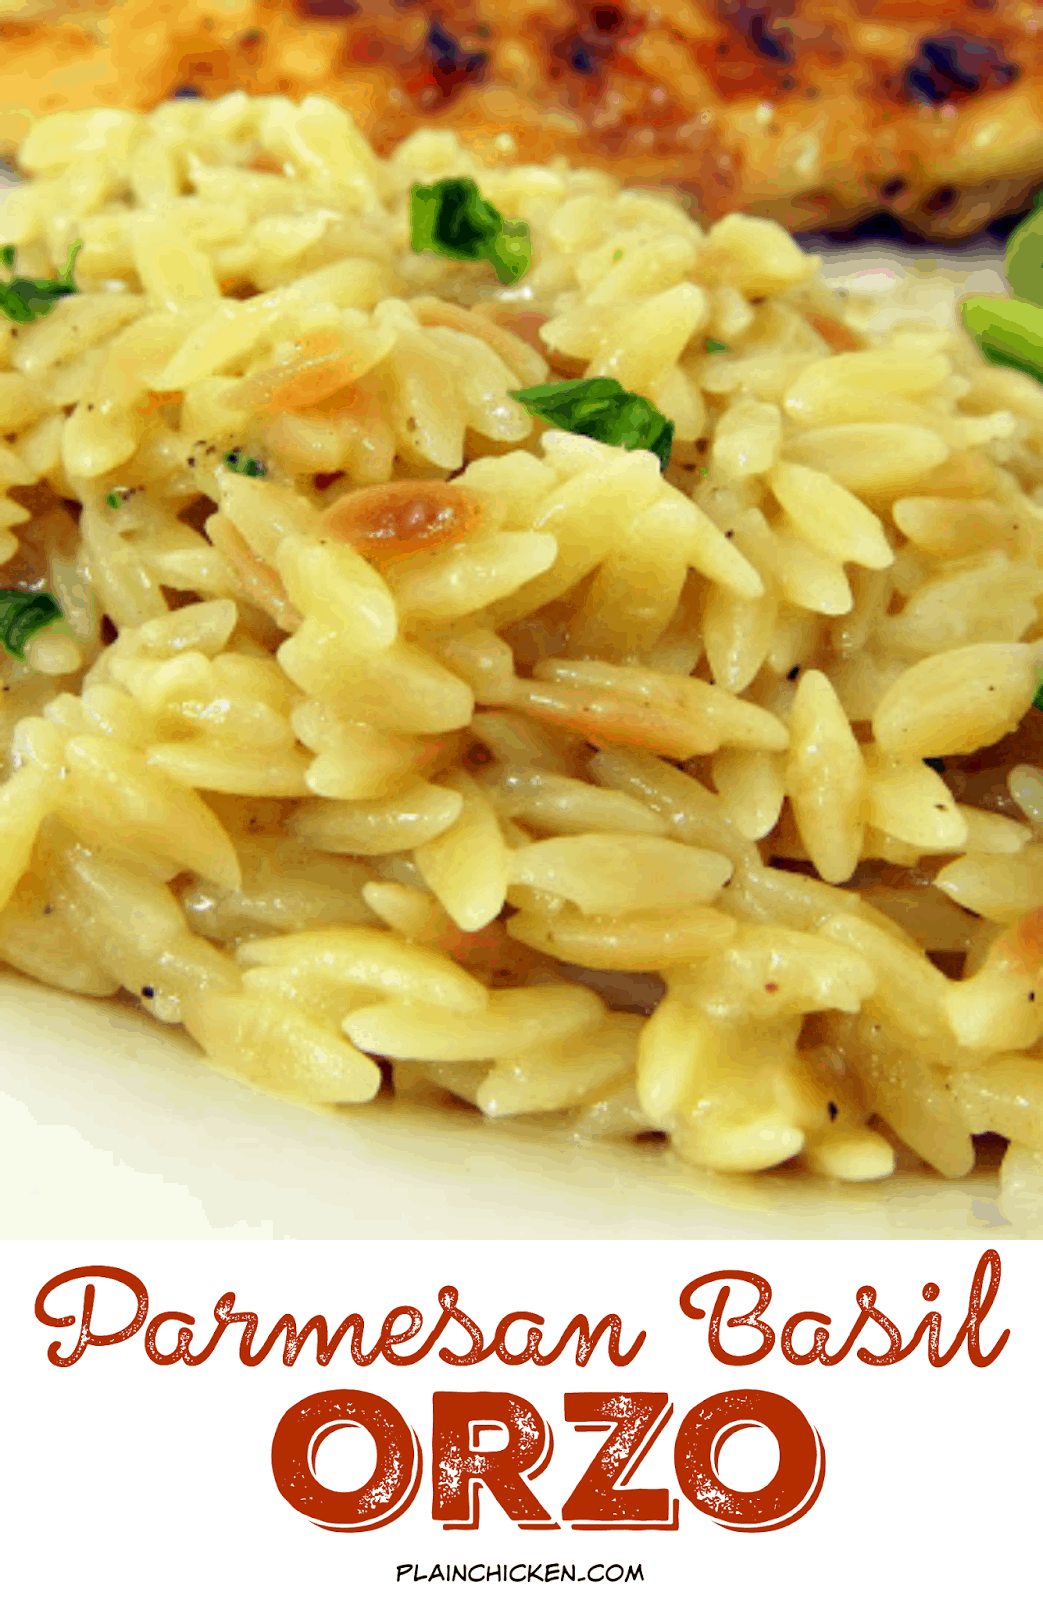 Parmesan Basil Orzo - toss the box and make this delicious side dish! orzo, chicken broth and parmesan cheese - ready in 20 minutes.